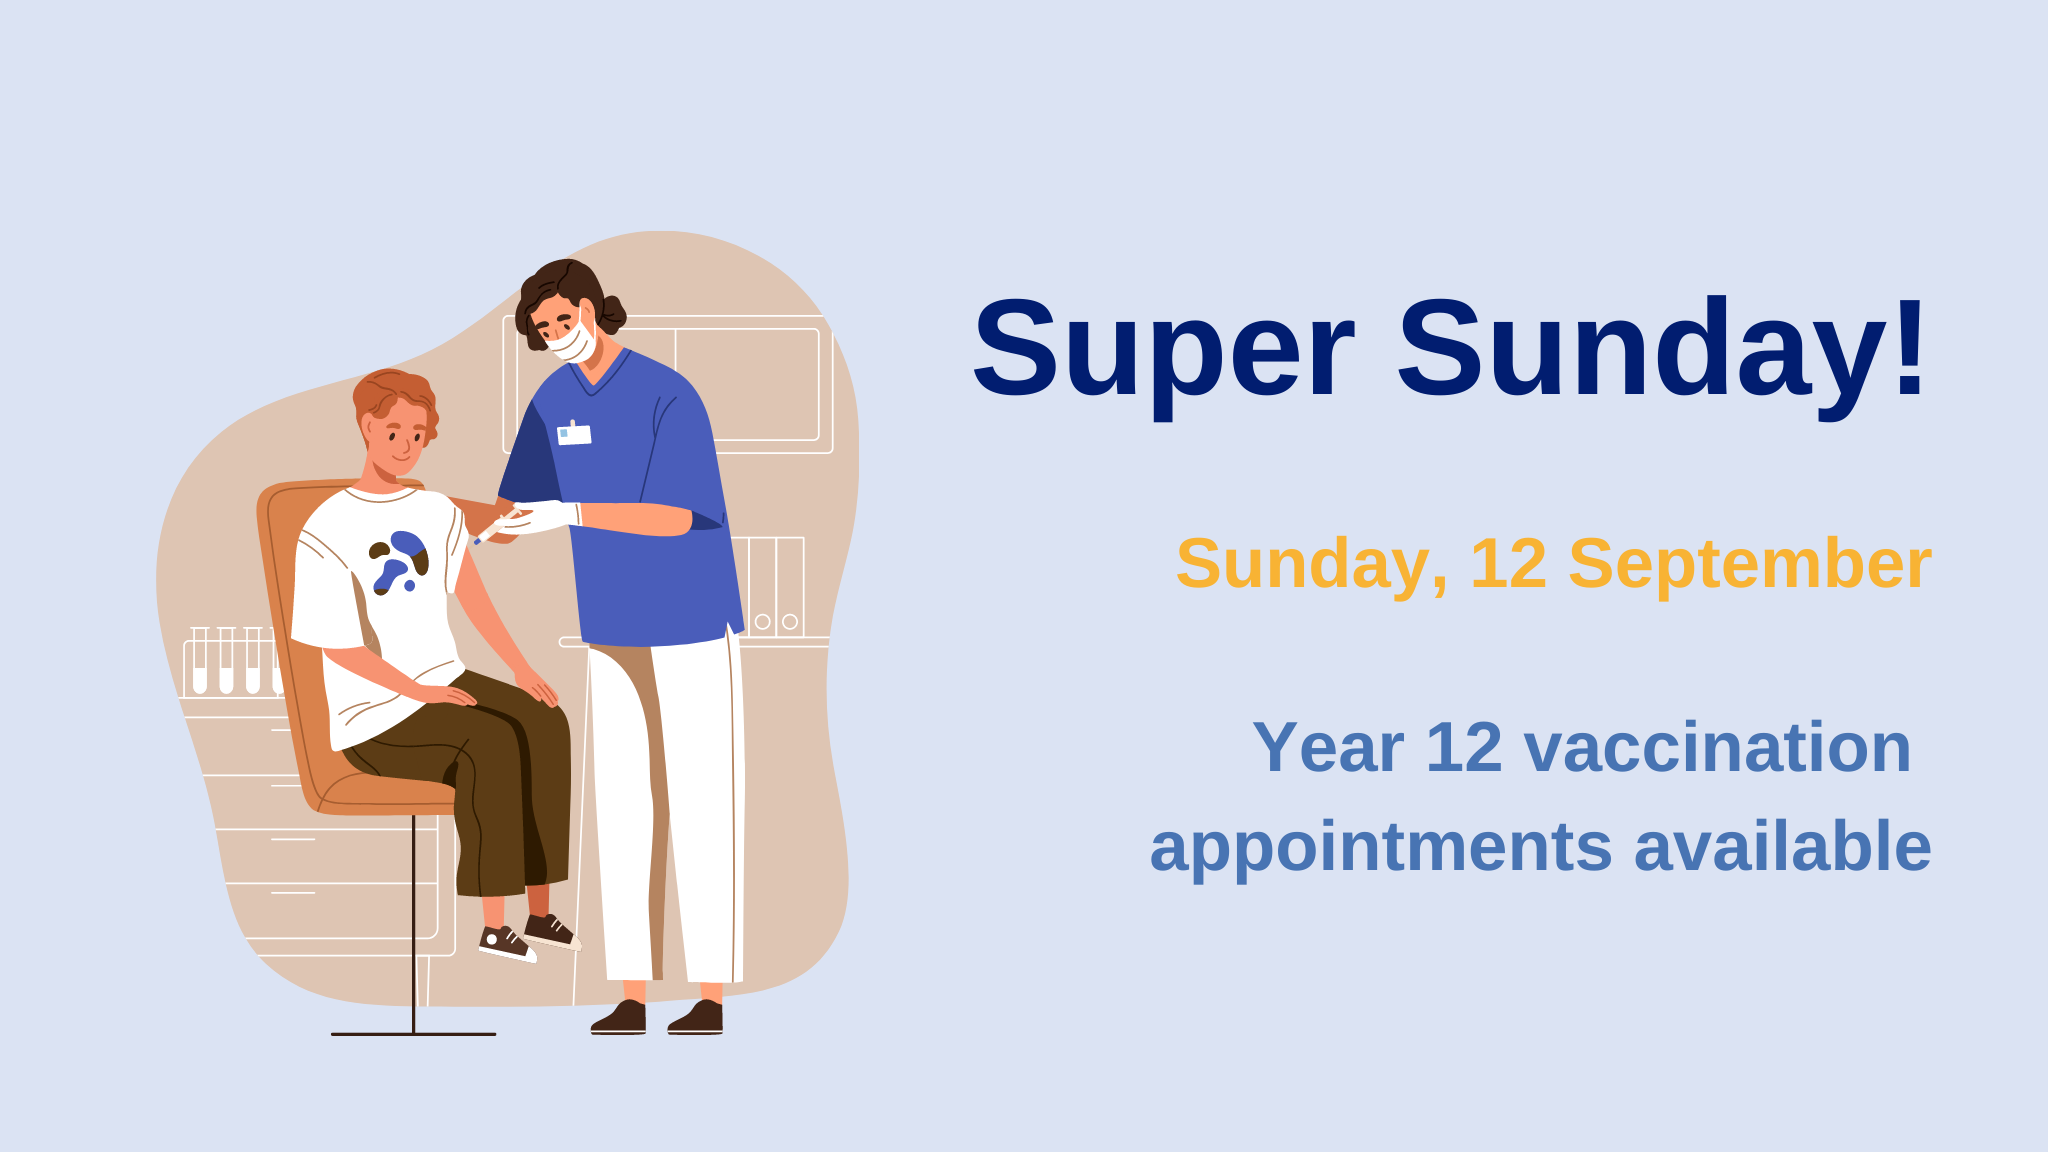 Super Sunday vaccinations for Year 12 students